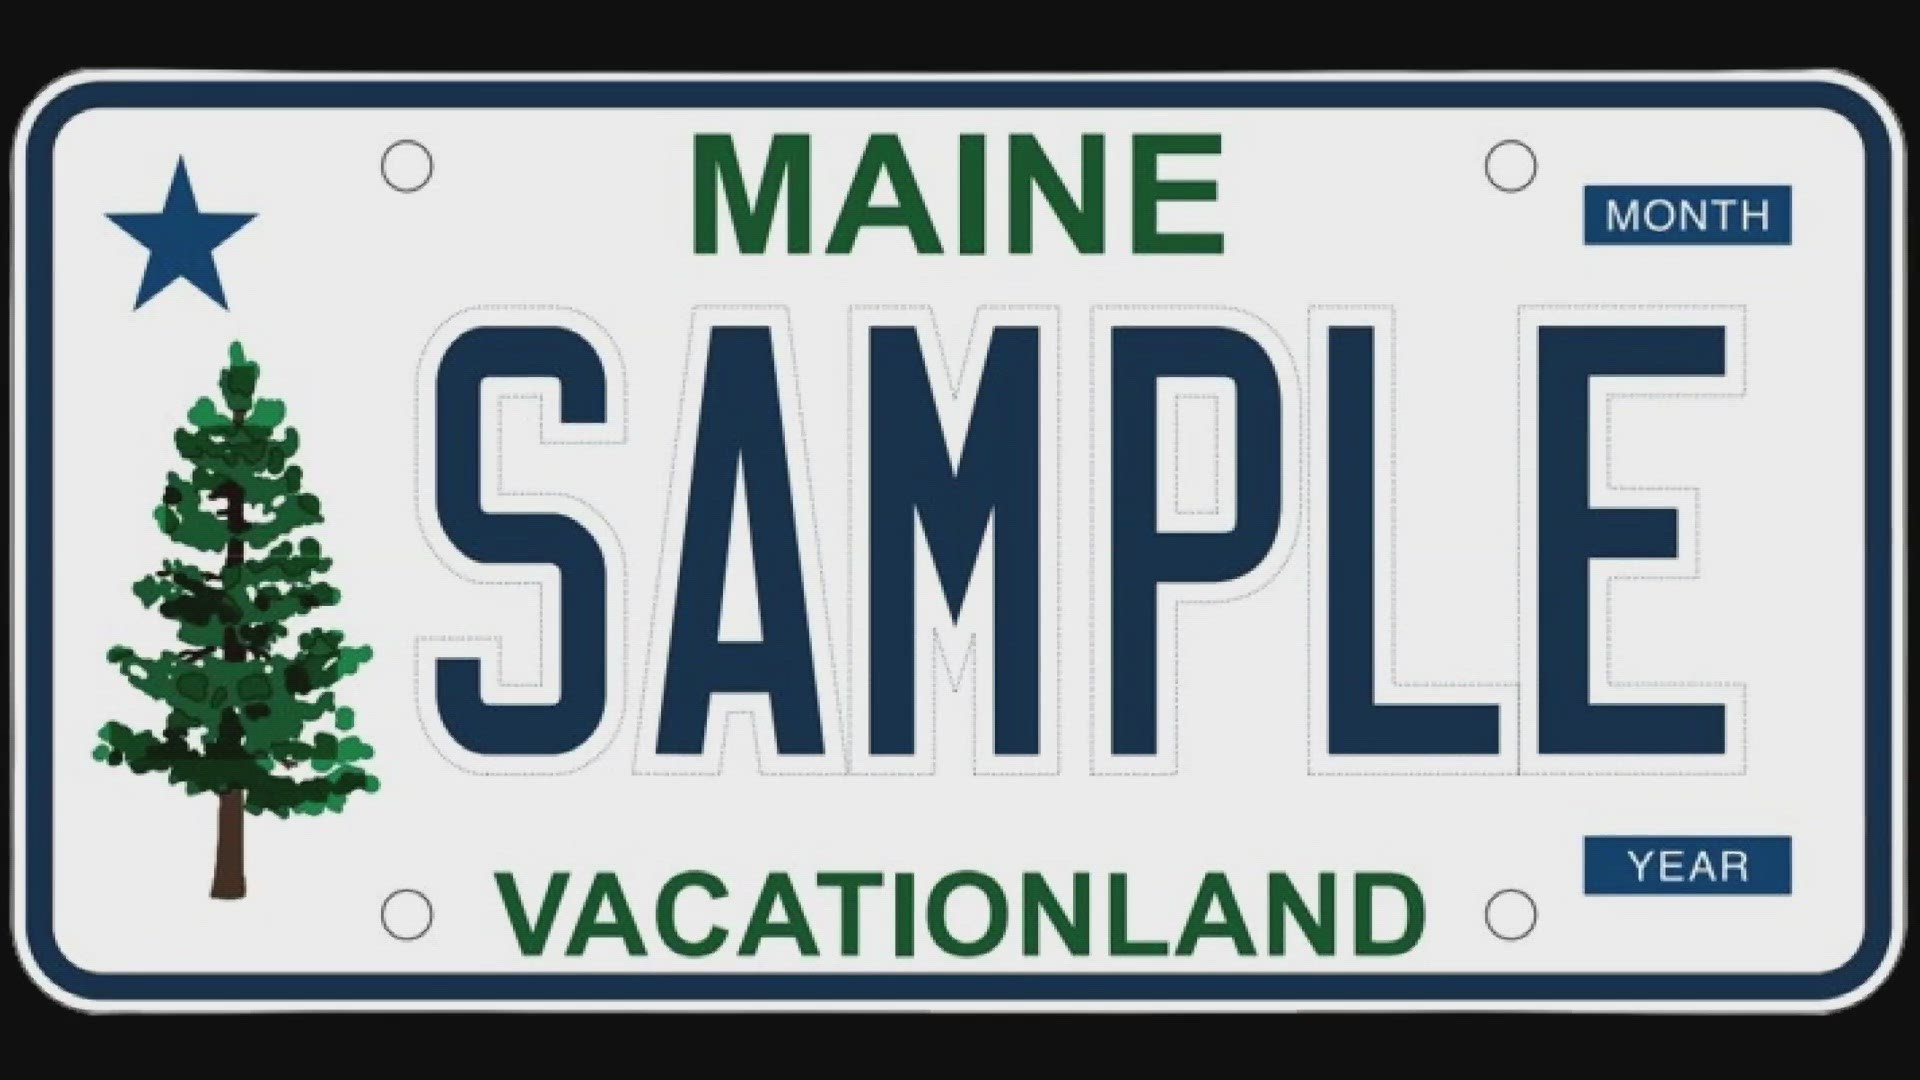 The new standard-issue plate will replace the current chickadee plate starting in May 2025.